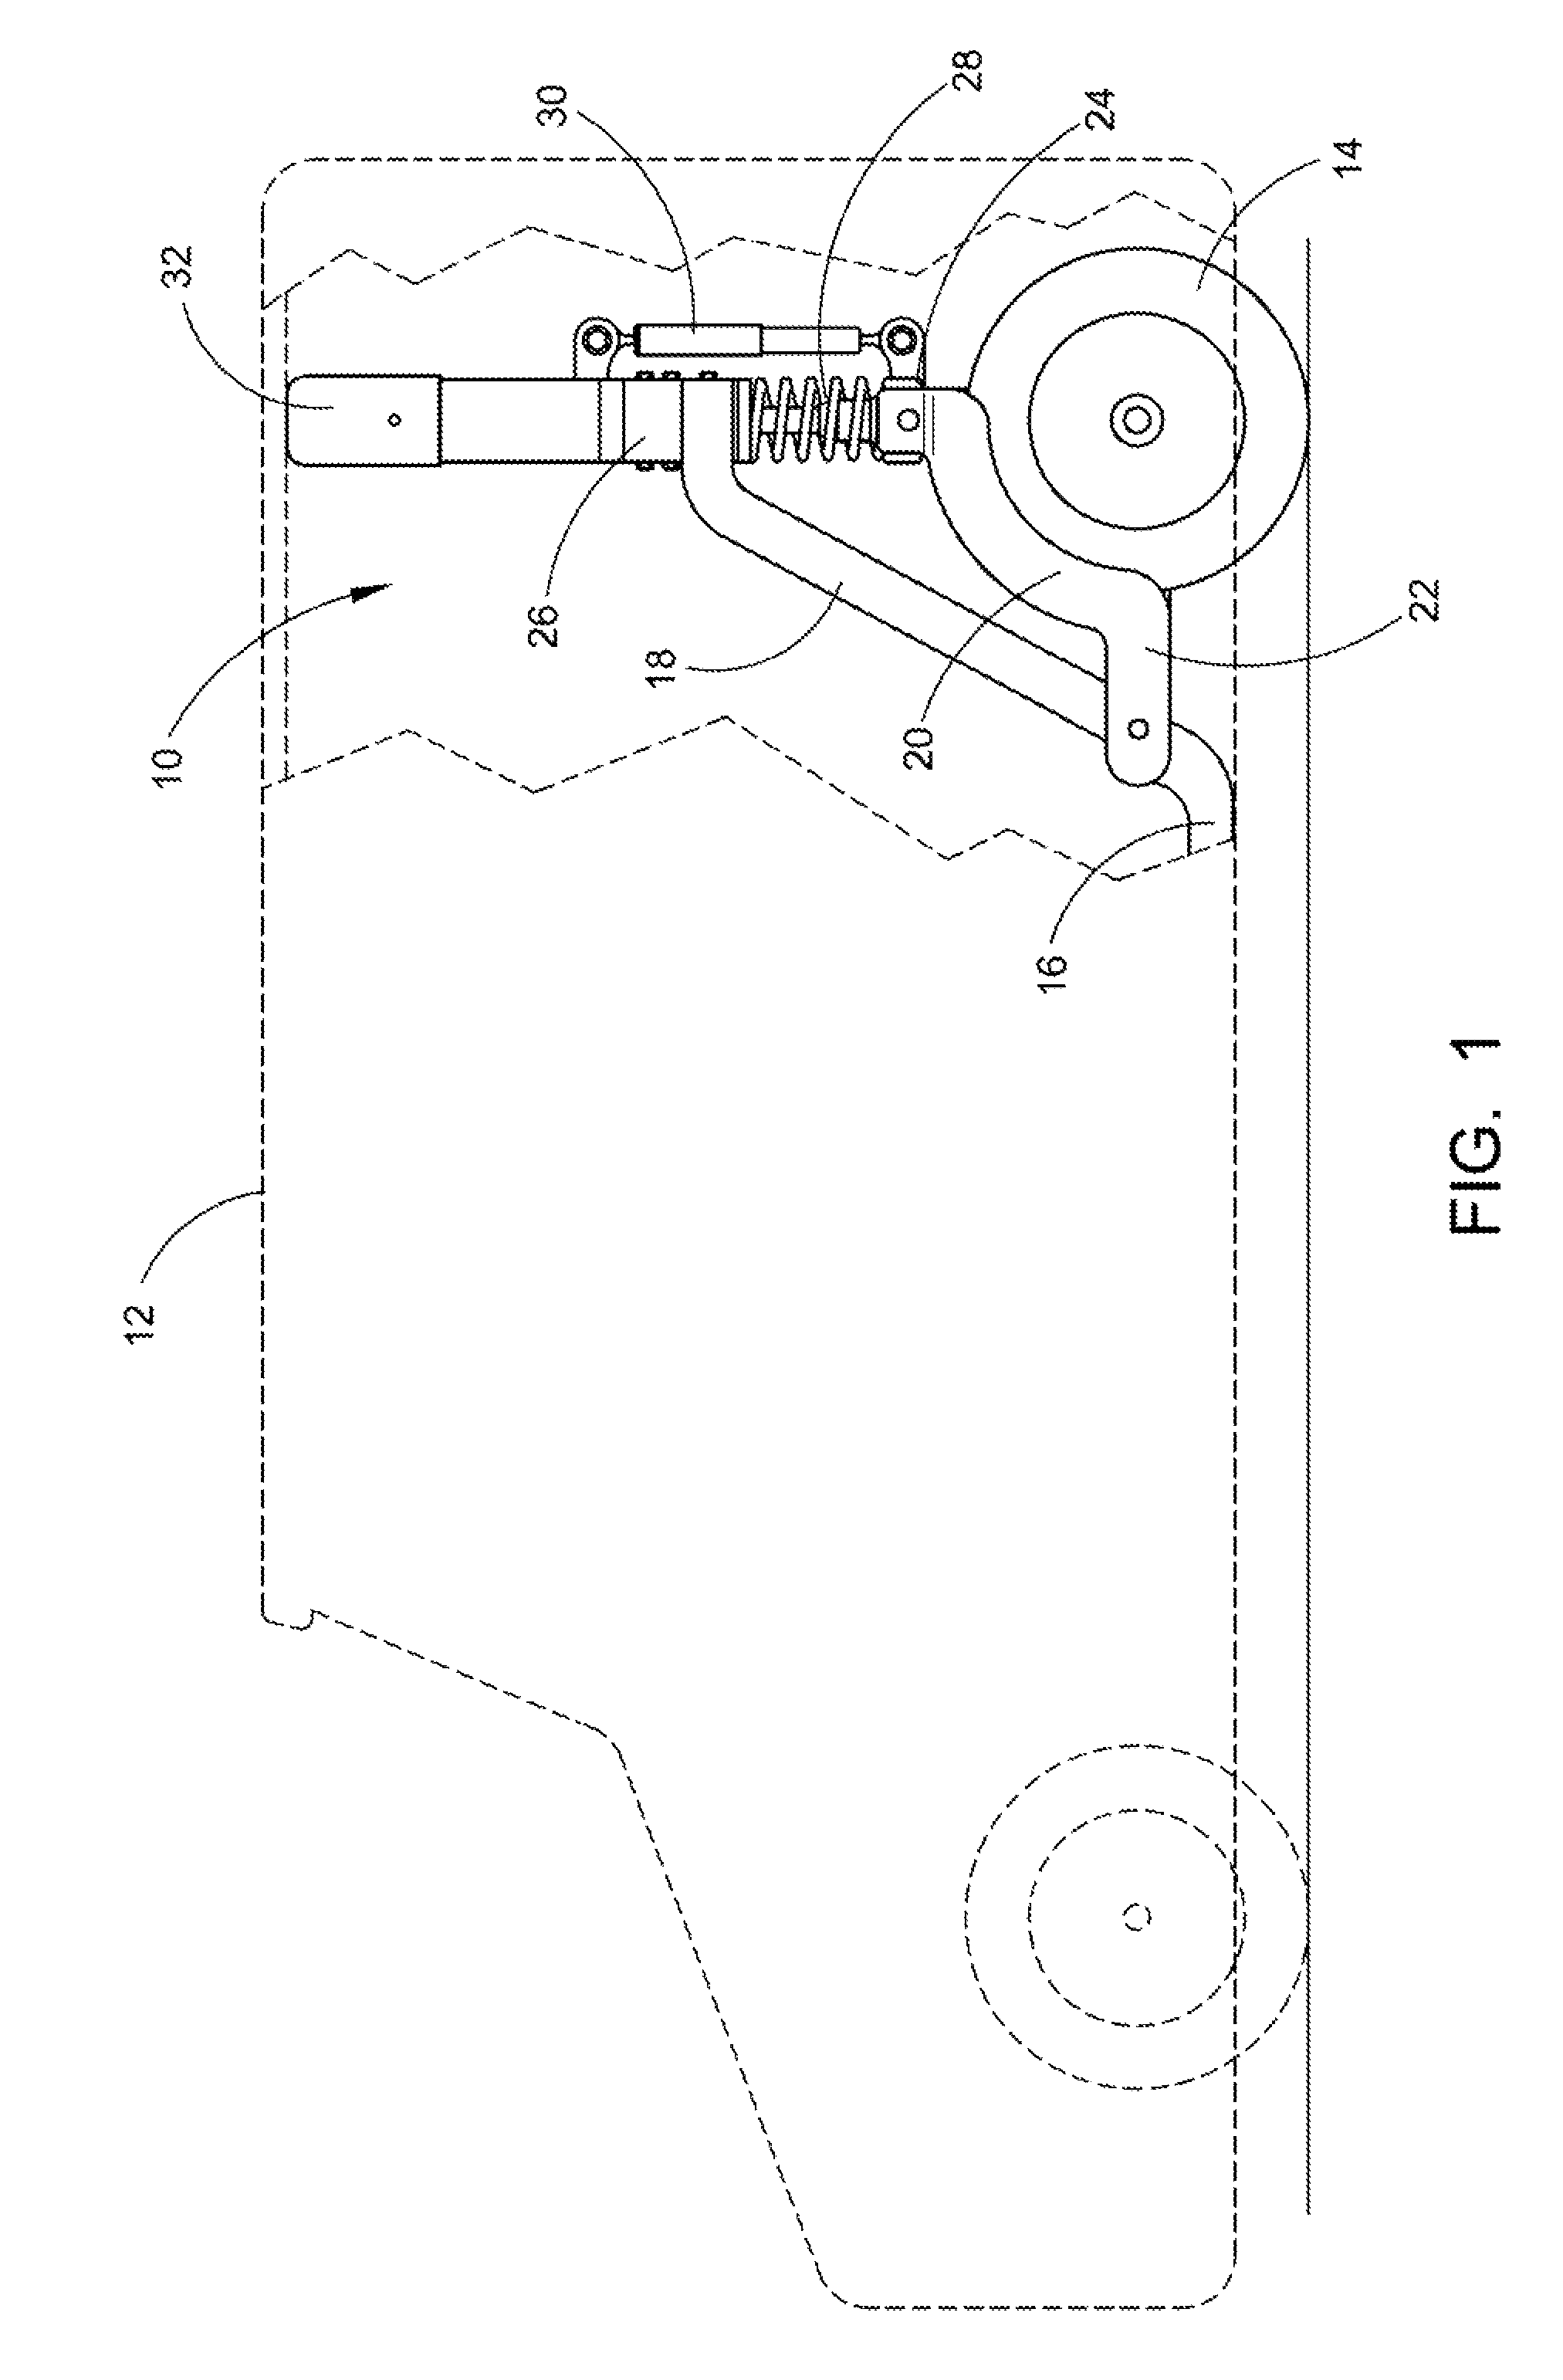 Raised axle and suspension system